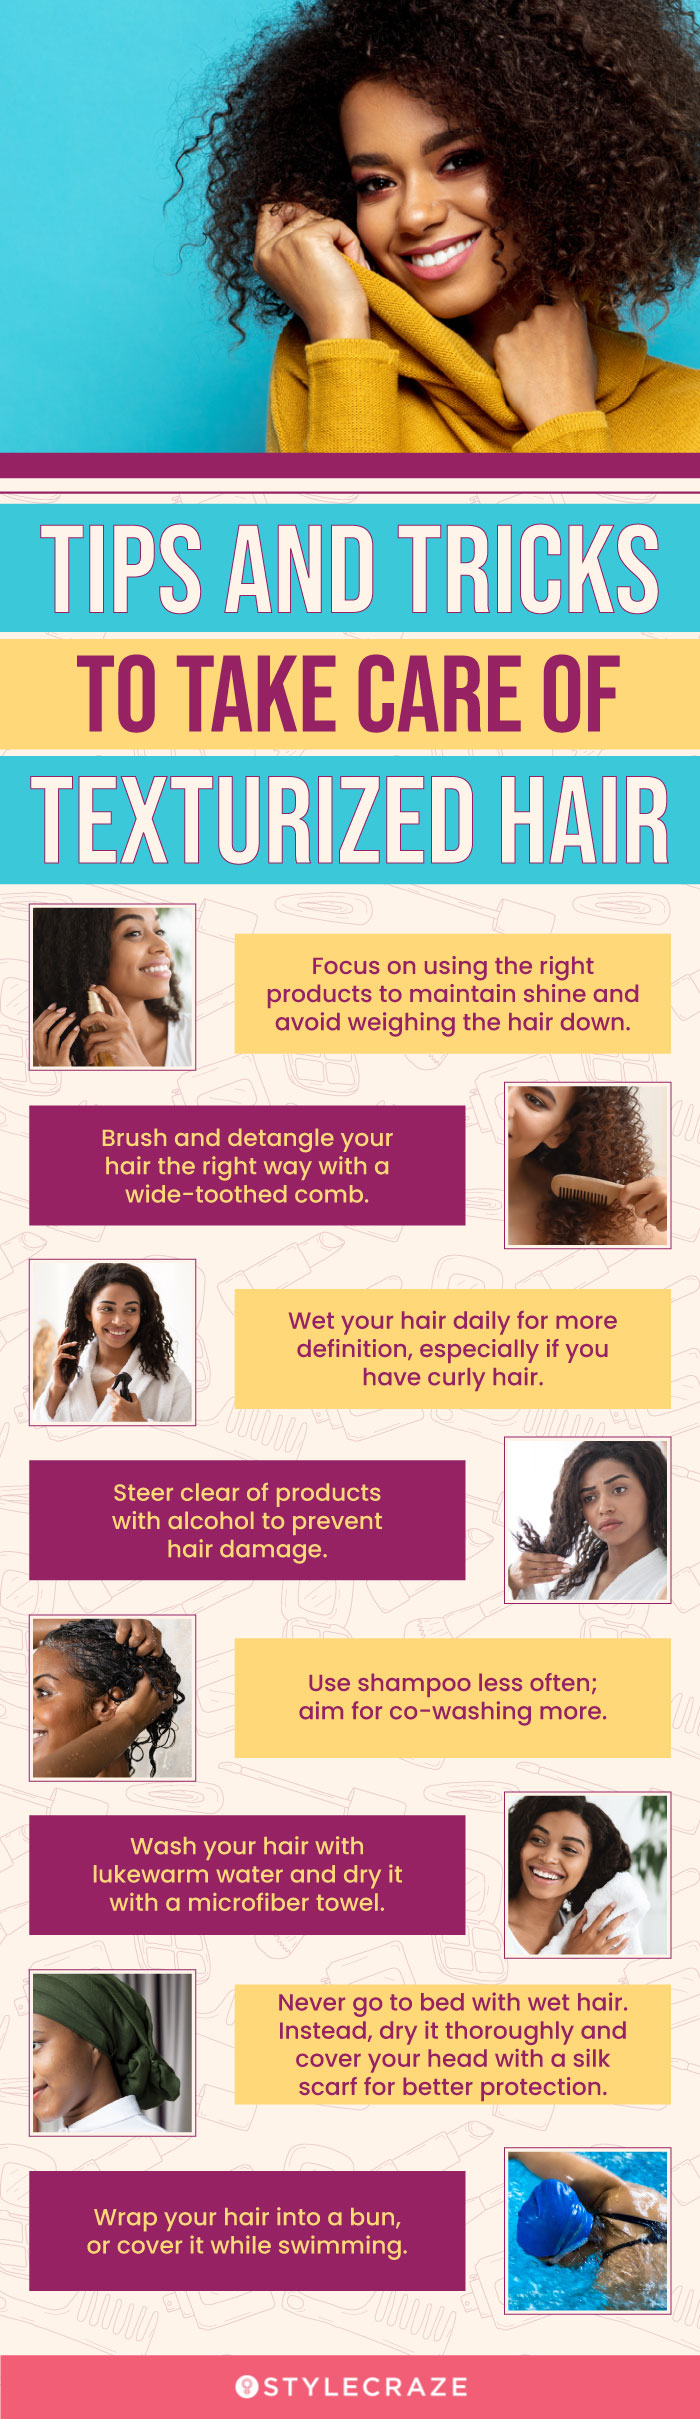 Tips & Tricks To Take Care Of Texturized Hair (infographic)